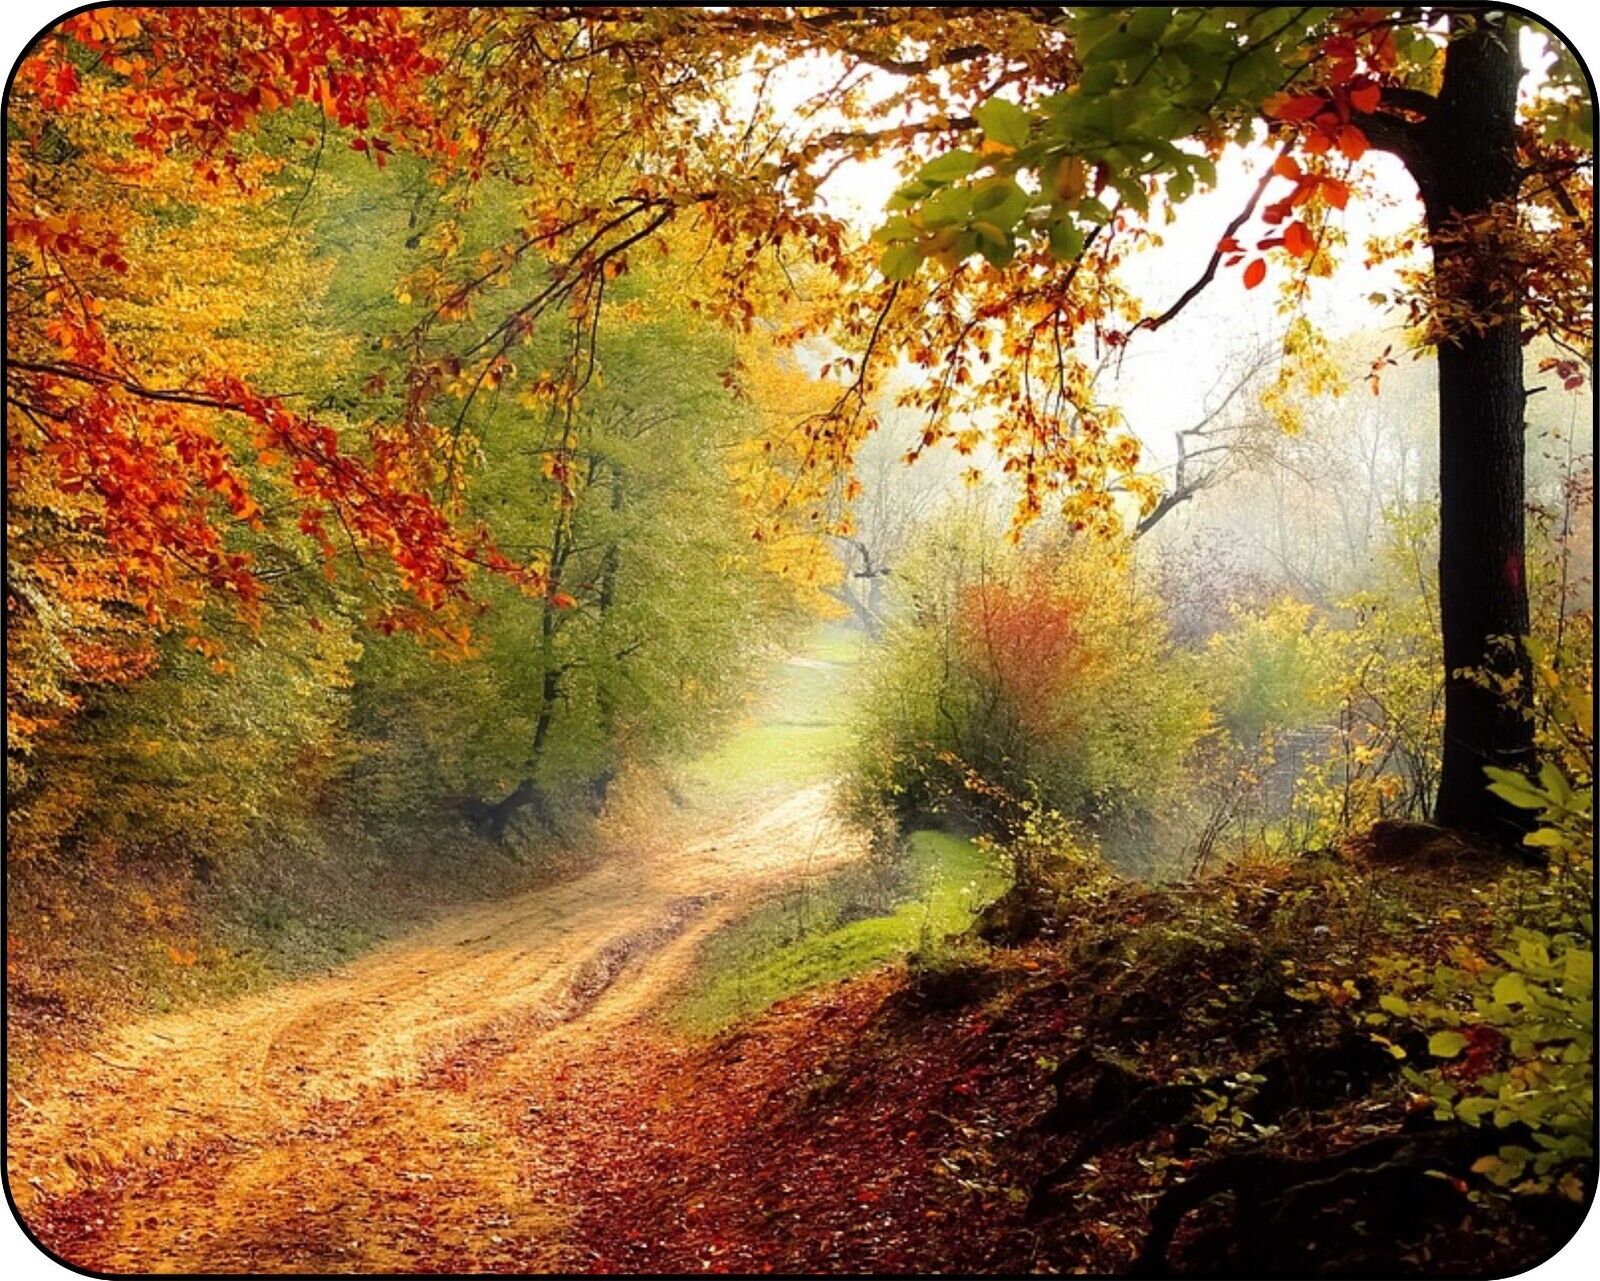 Deep Green Forest in the Fall  Colorful  Photo Art Designs  Mouse Pad